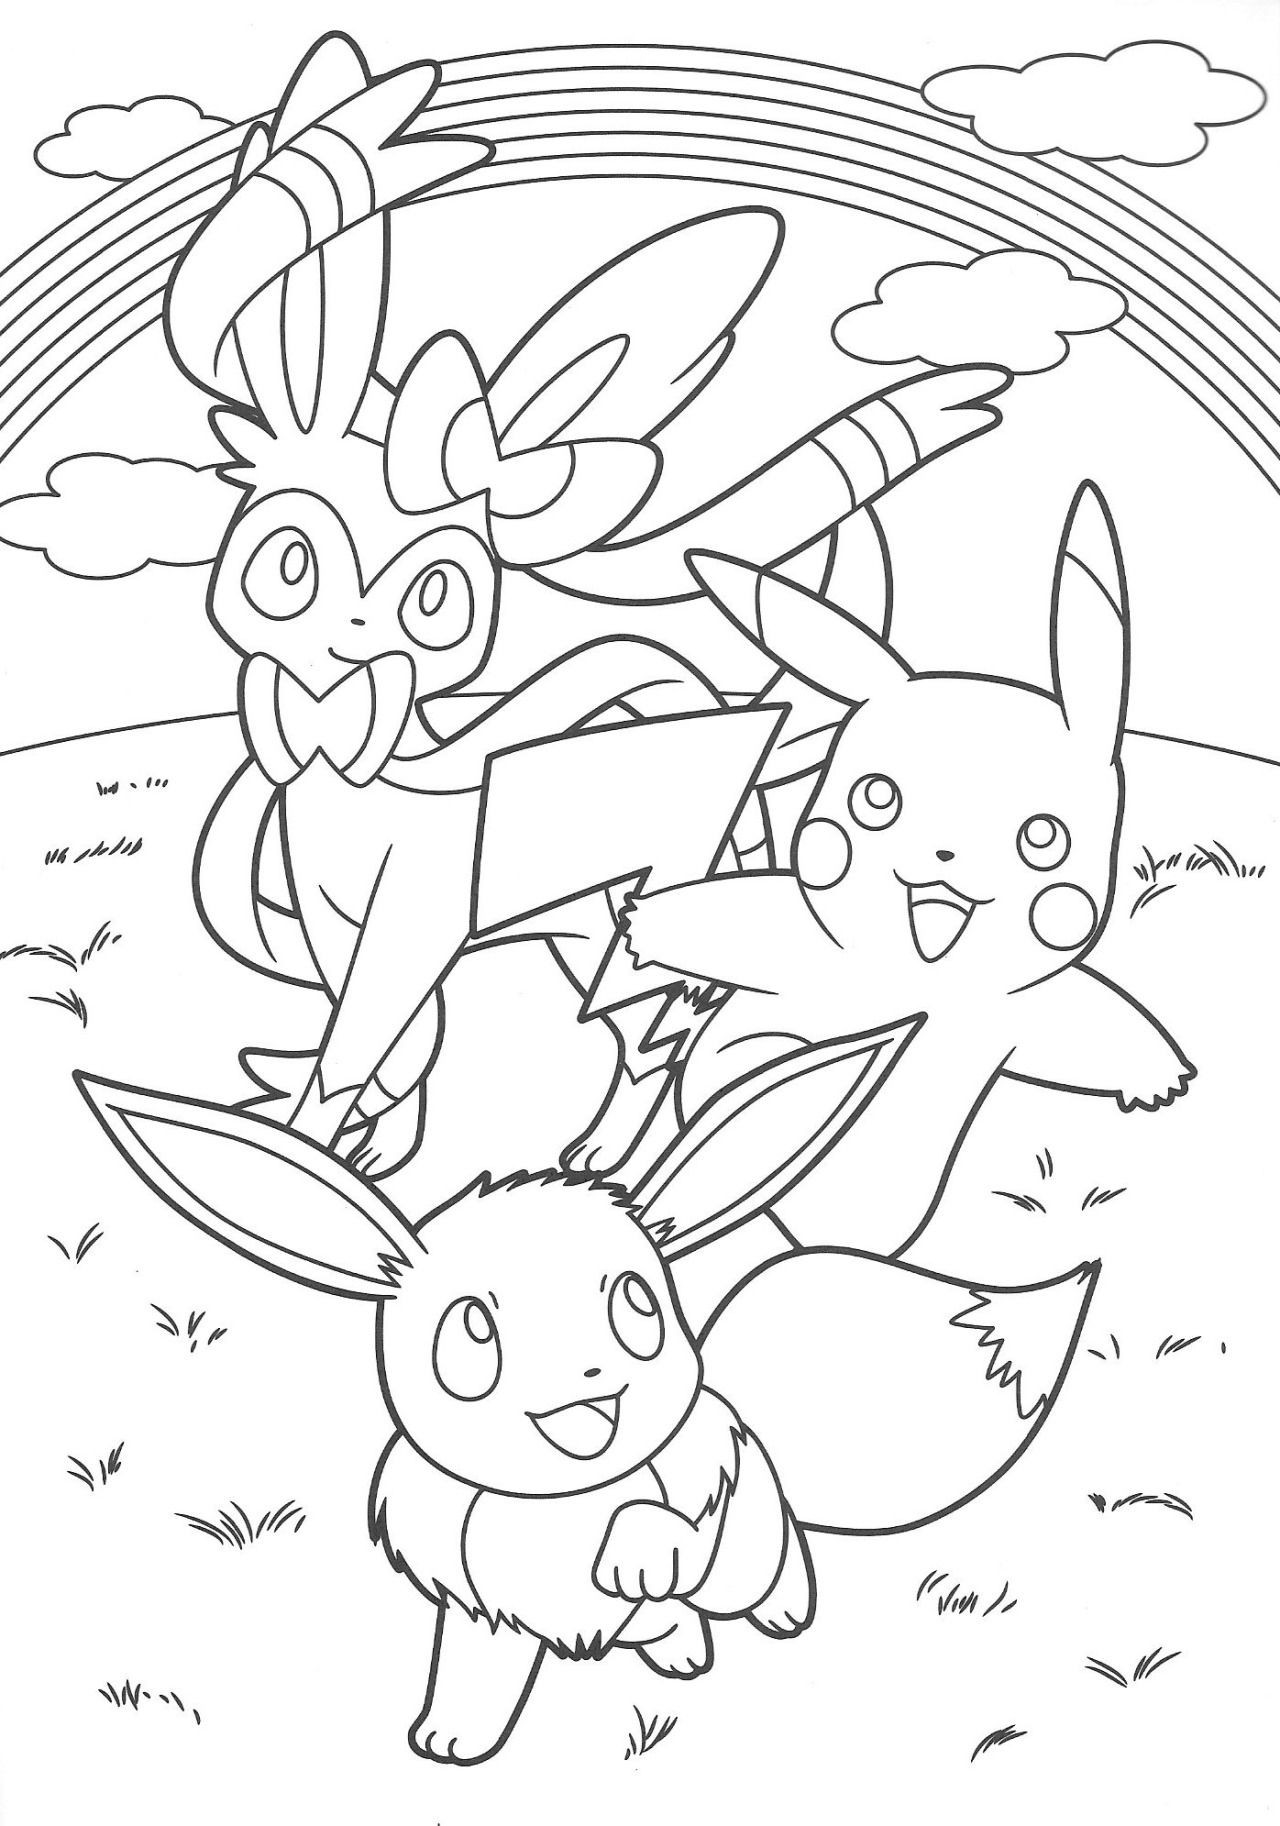 Coloring Sheets For Boys Pokemon
 Pokémon Scans from PacificPikachu s Collection